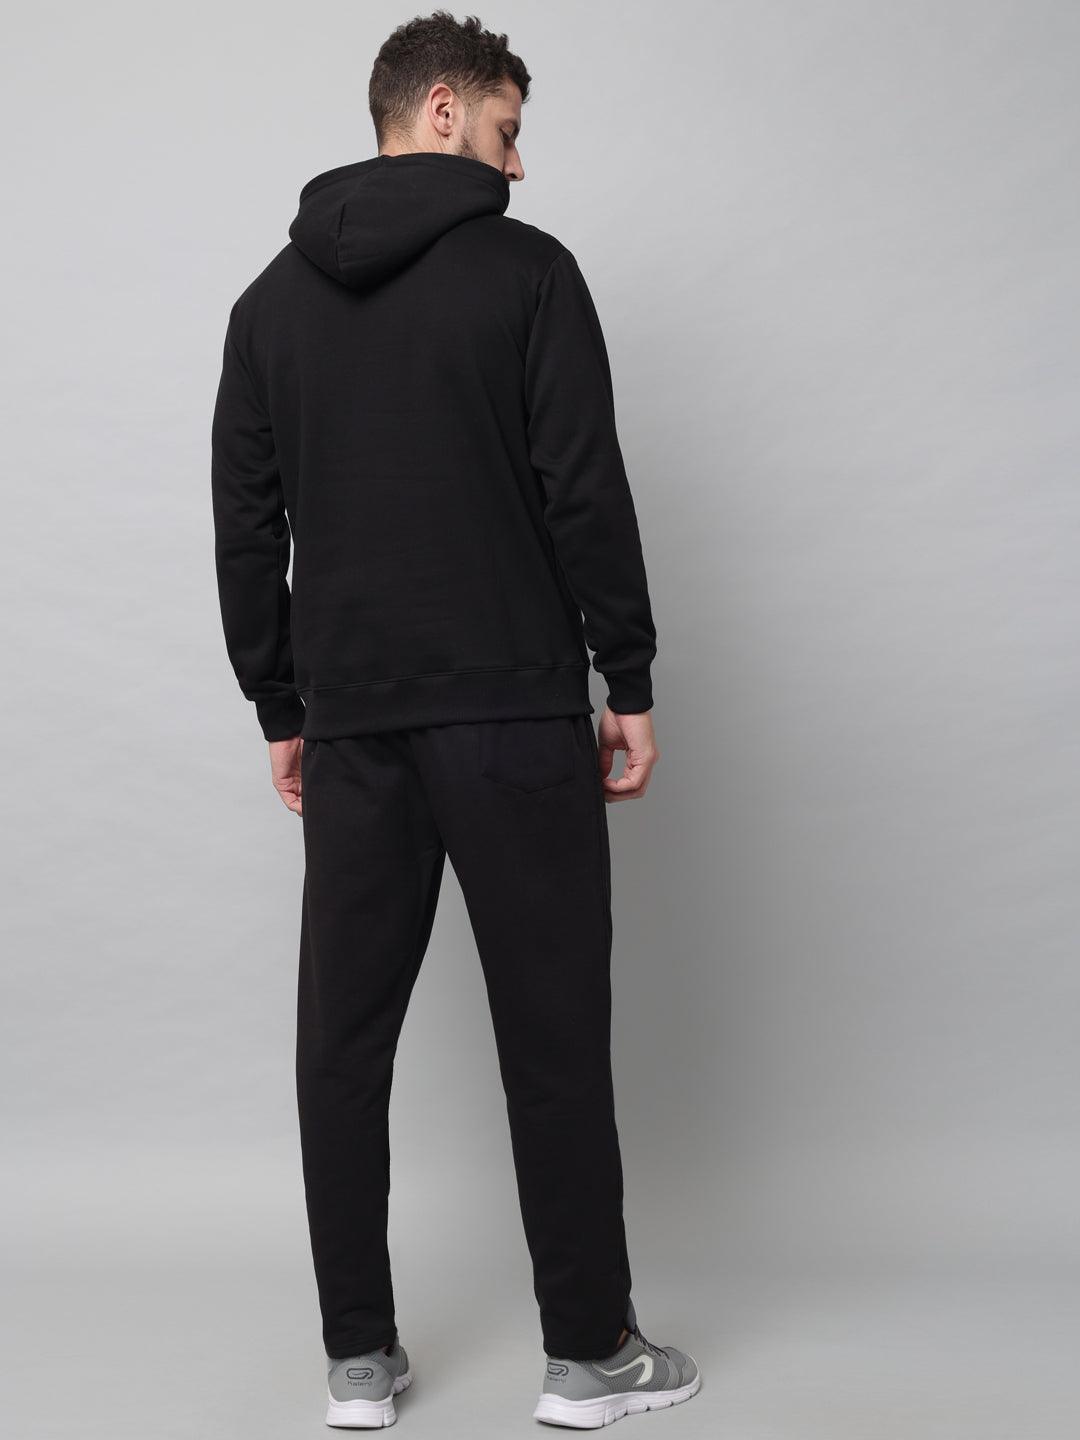 Griffel Men's Front Logo Solid Fleece Basic Hoodie and Joggers Full set Black Tracksuit - griffel